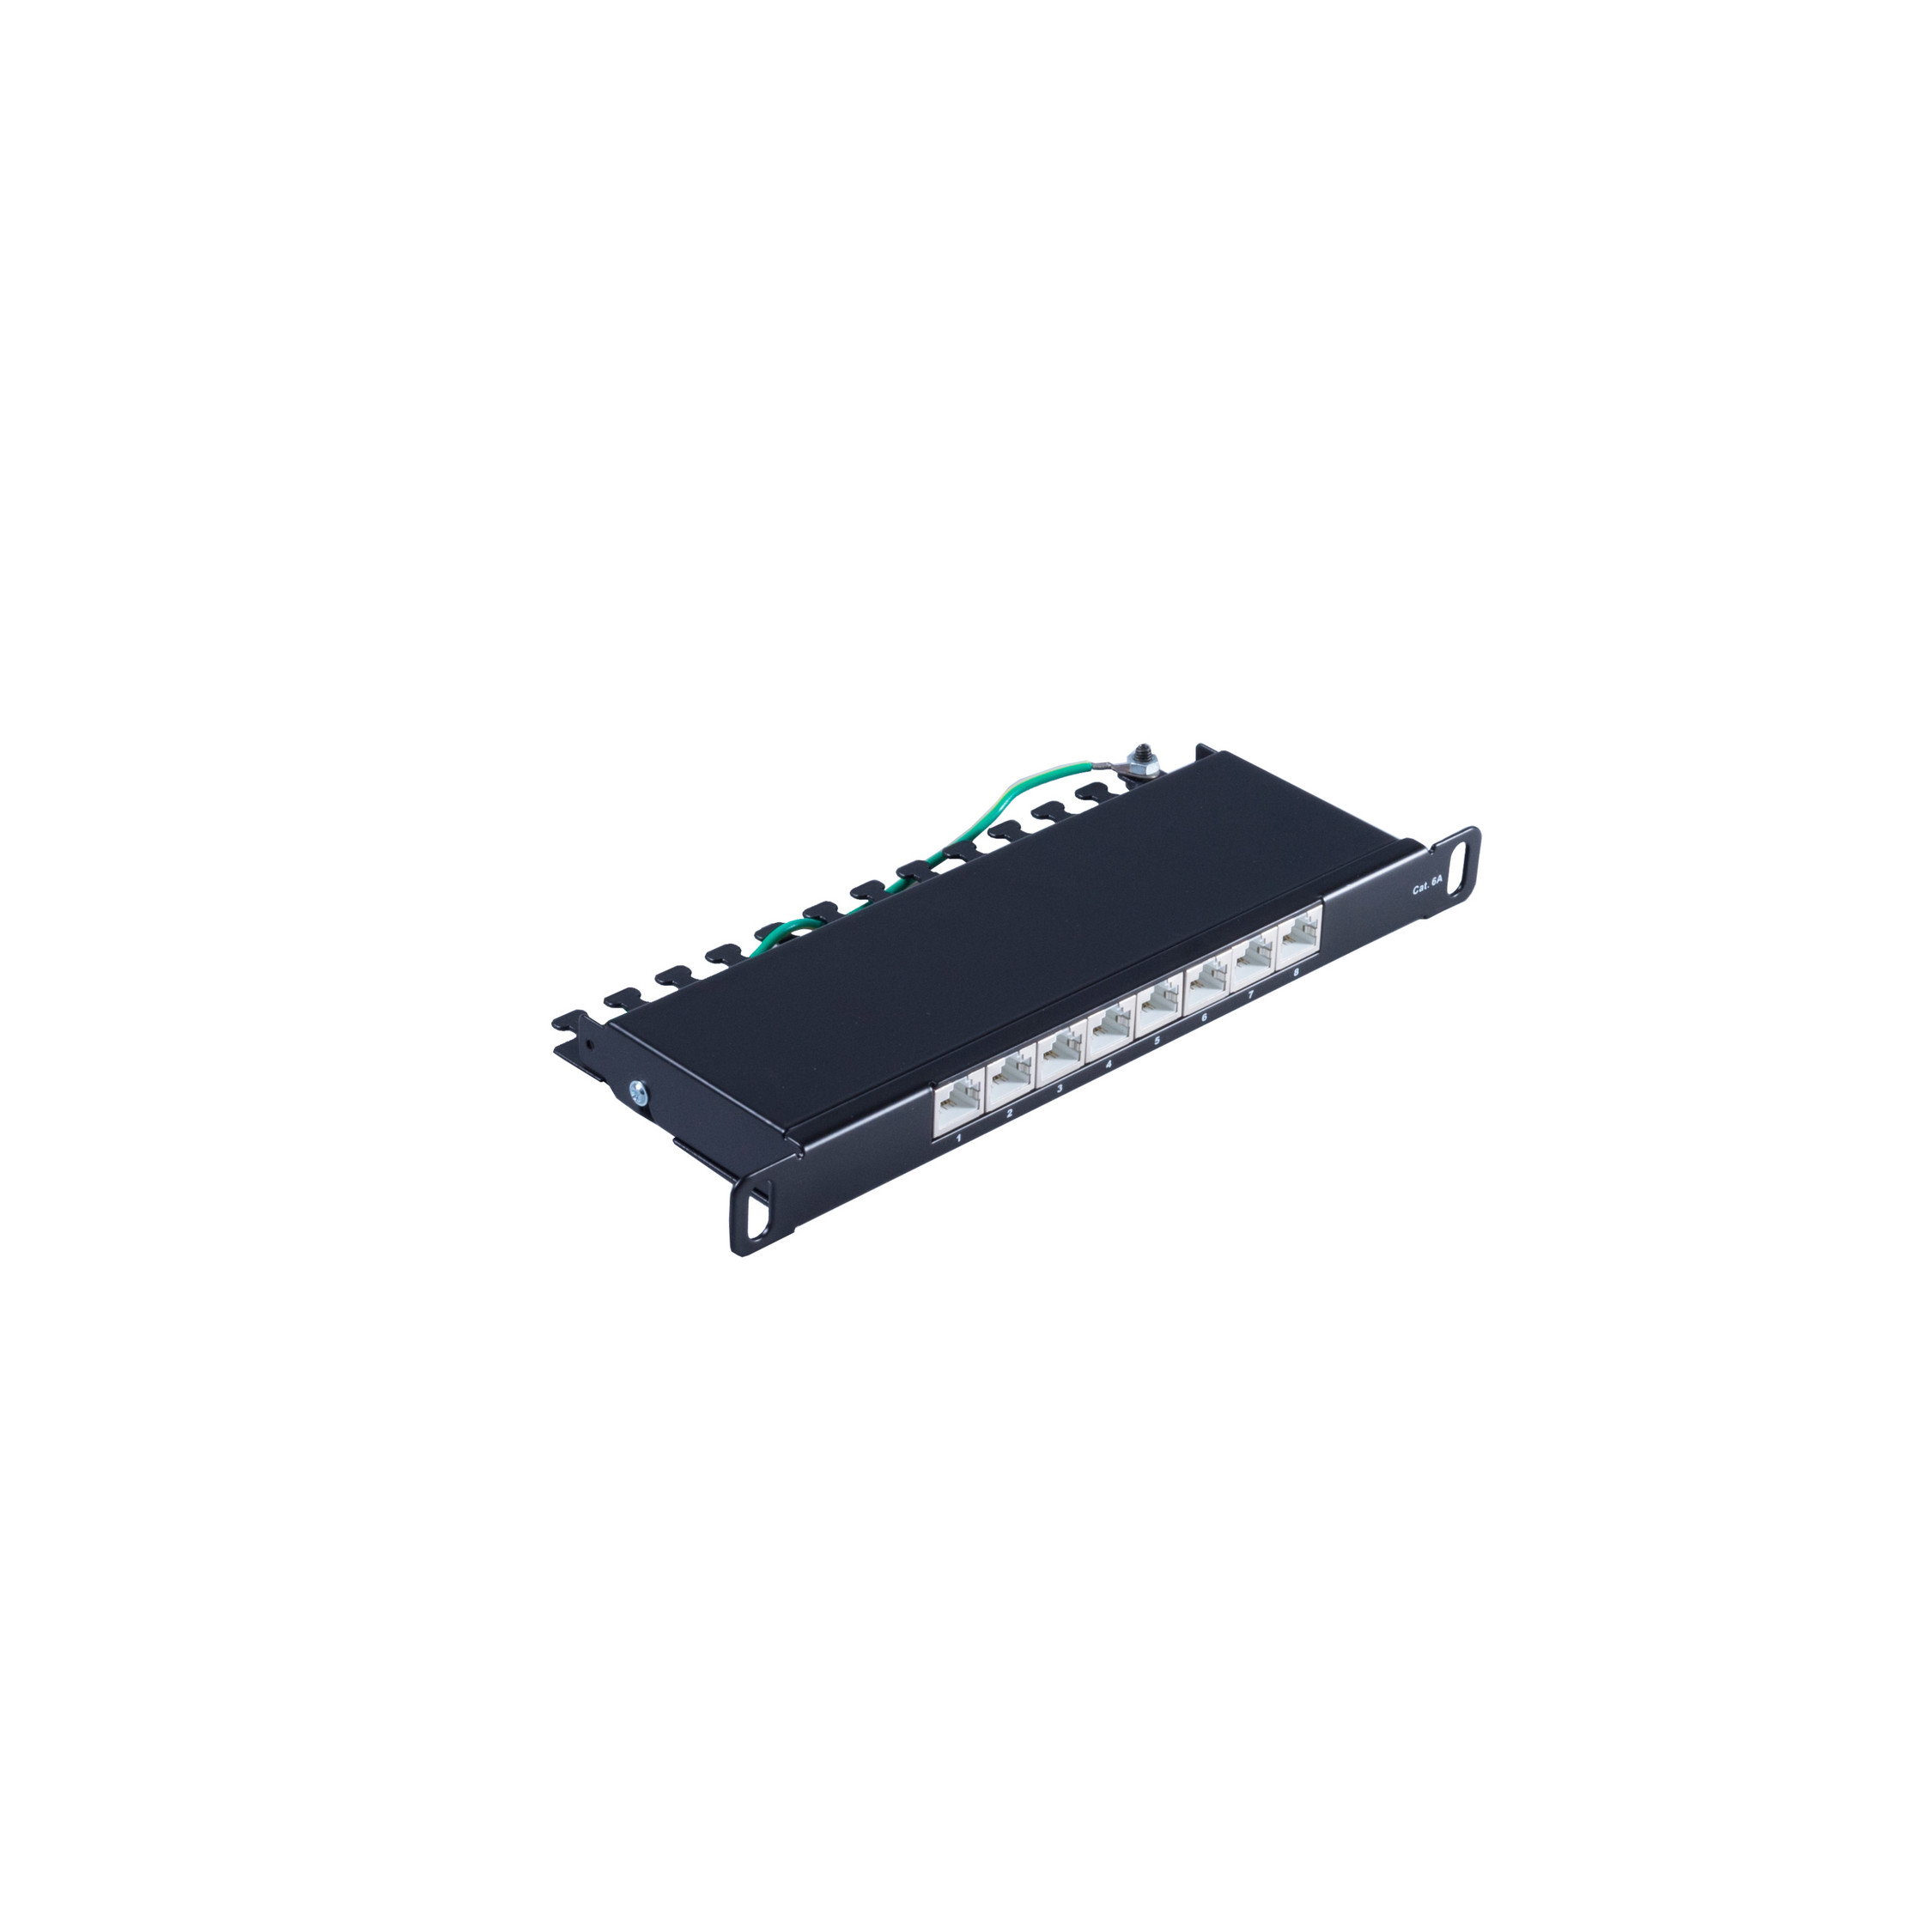 SHIVERPEAKS Slim Patchpanel Port Patchpanel 0,5HE, Cat.6A, 10” 8